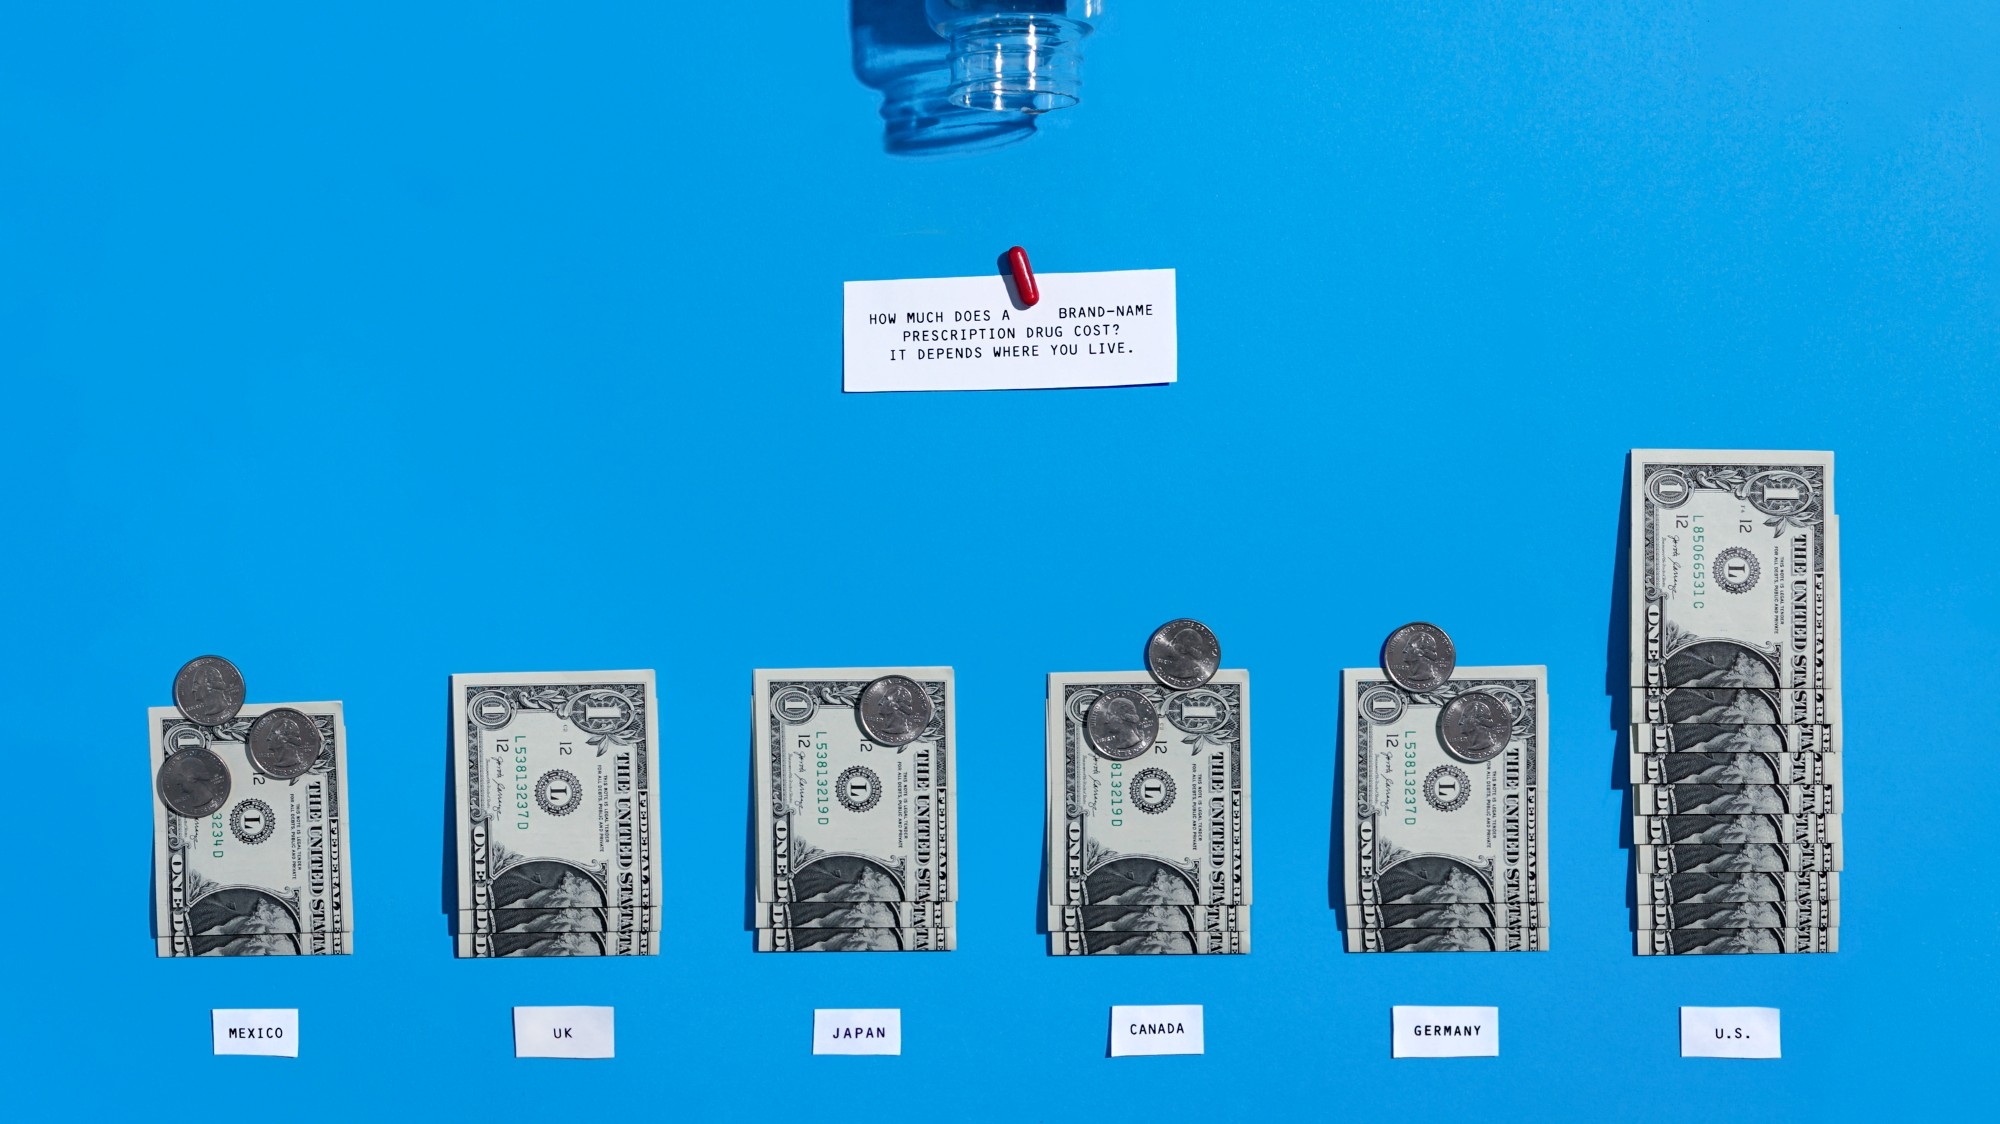 Photographic data visualization by Gabrielle Mérite representing the prices of brand-name drugs with real money on a blue background. For the same pill, the U.S cost is $10 while Germany and Canada’s cost would be $3.50, Japan's $3.25, the UK's $3.00 and Mexico's $2.75.